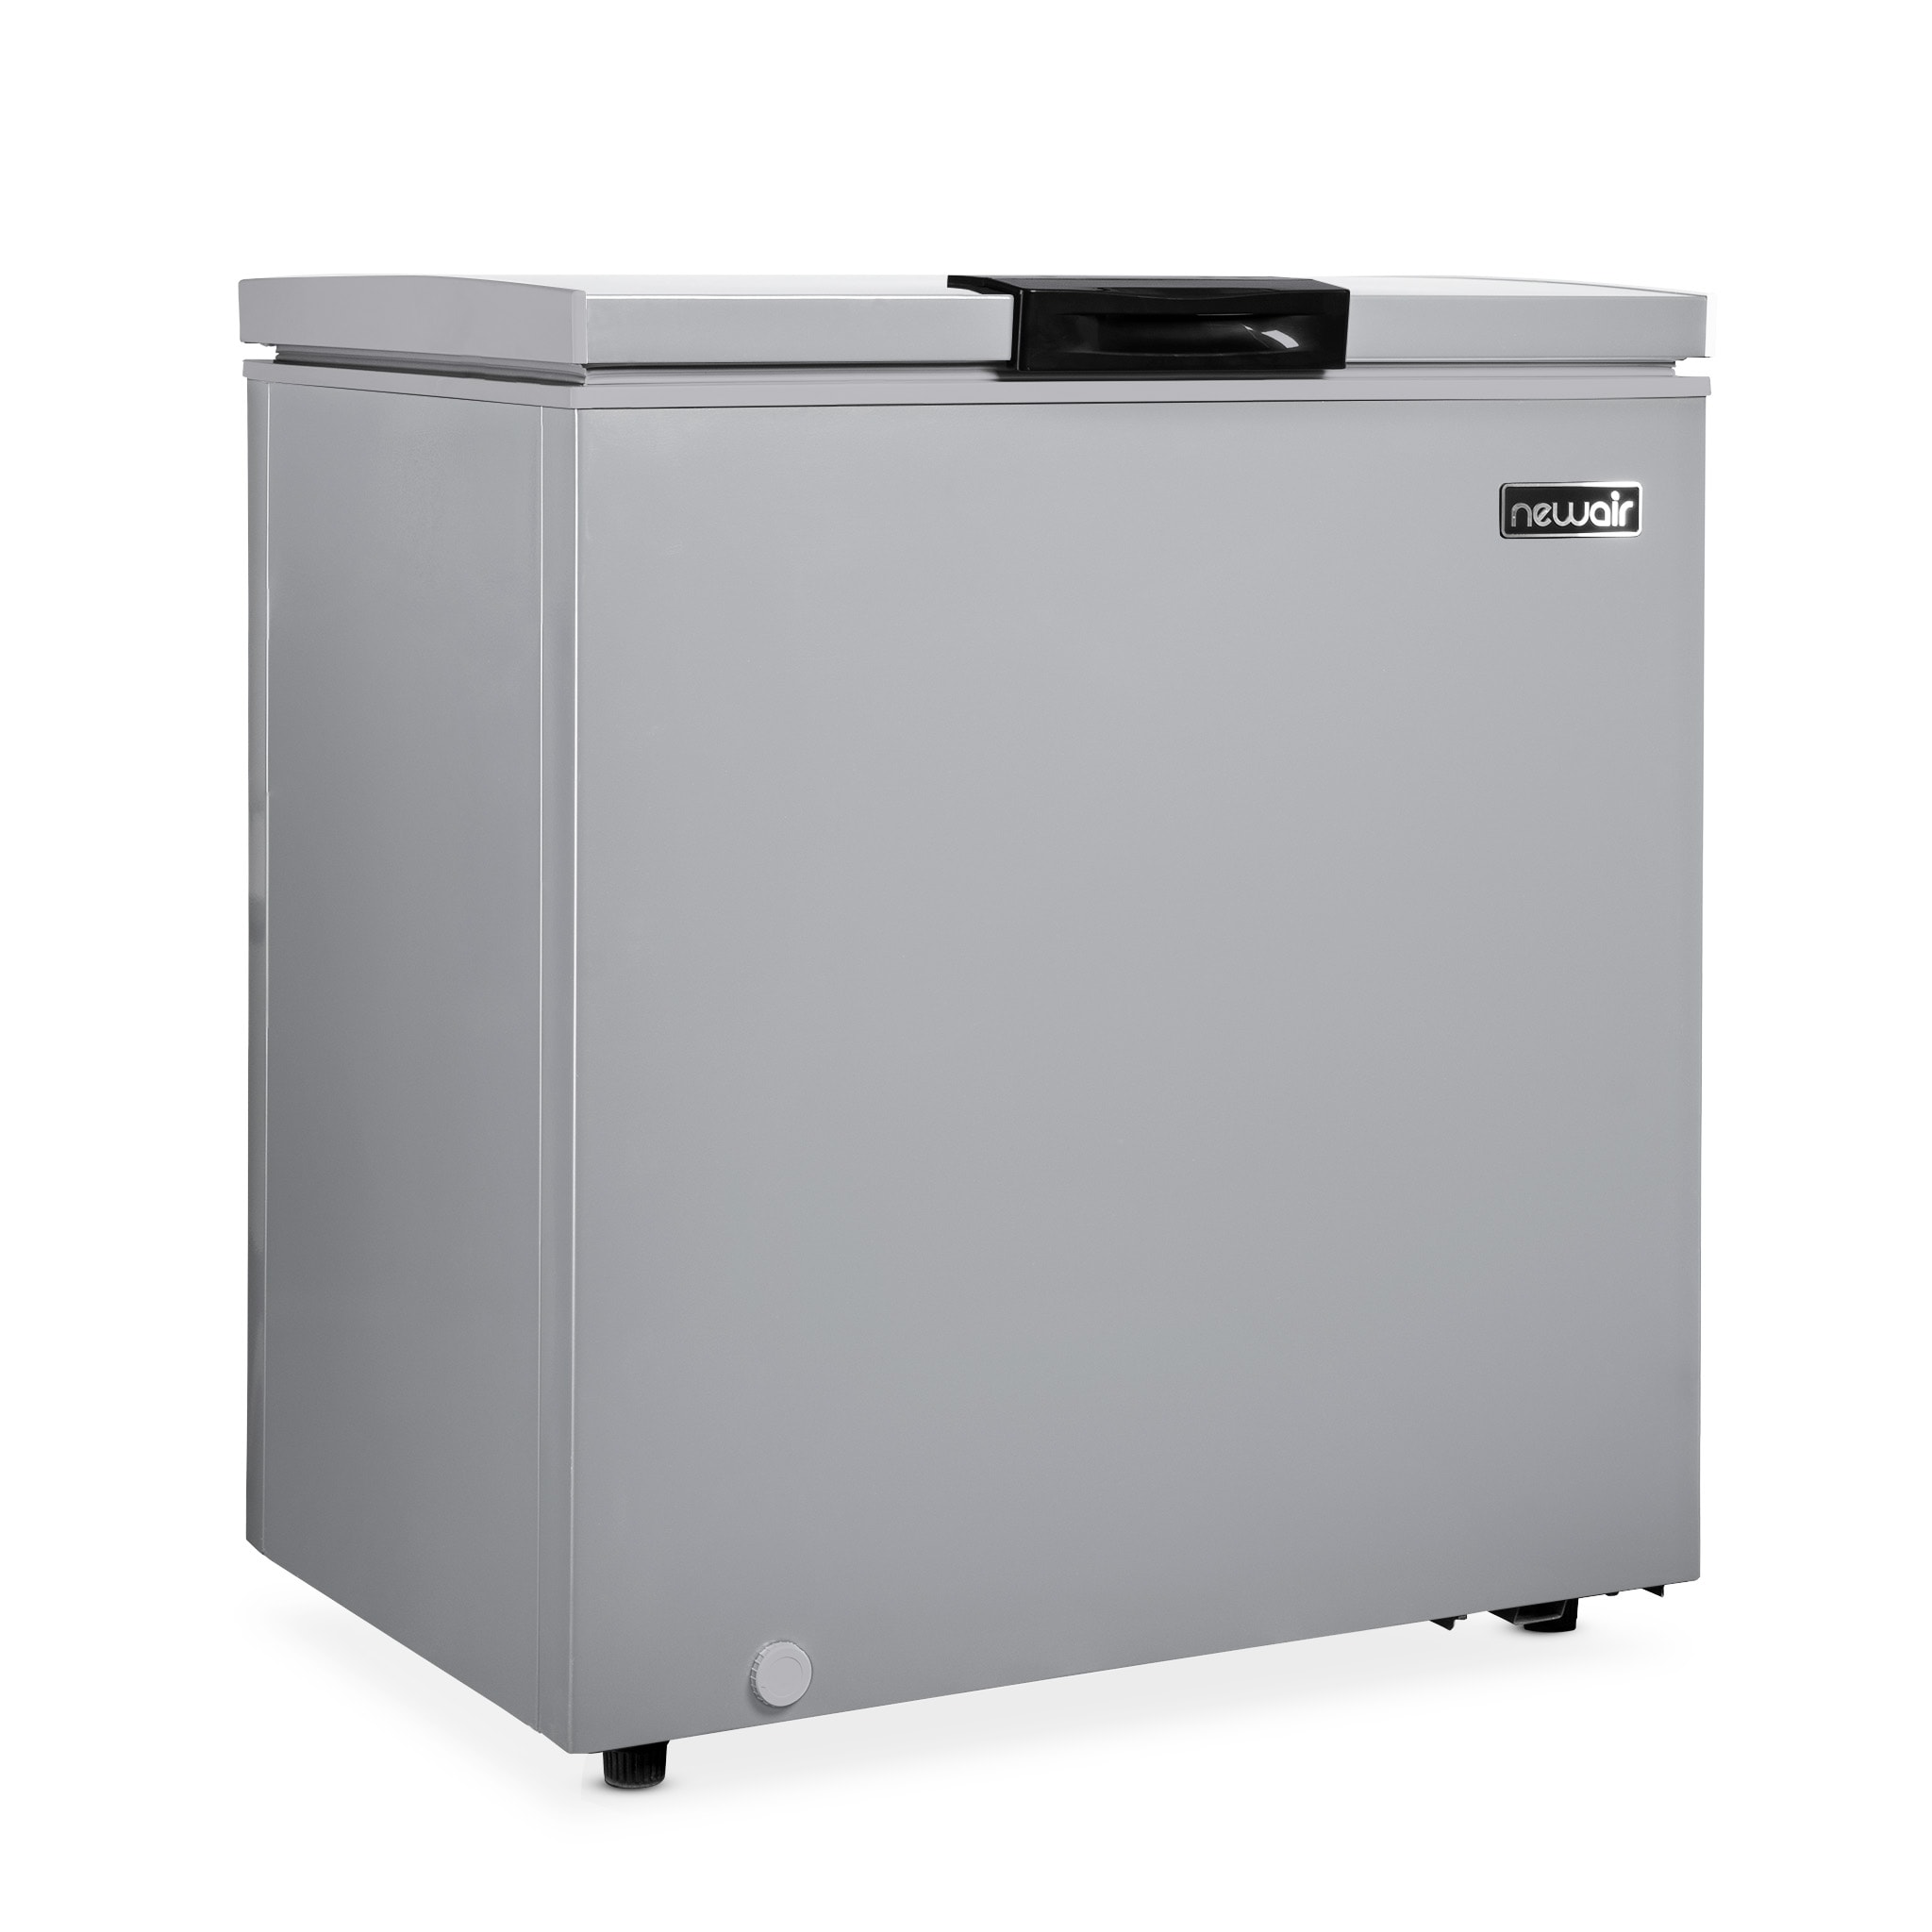 Maytag brand Introduces new chest freezer that is garage ready in